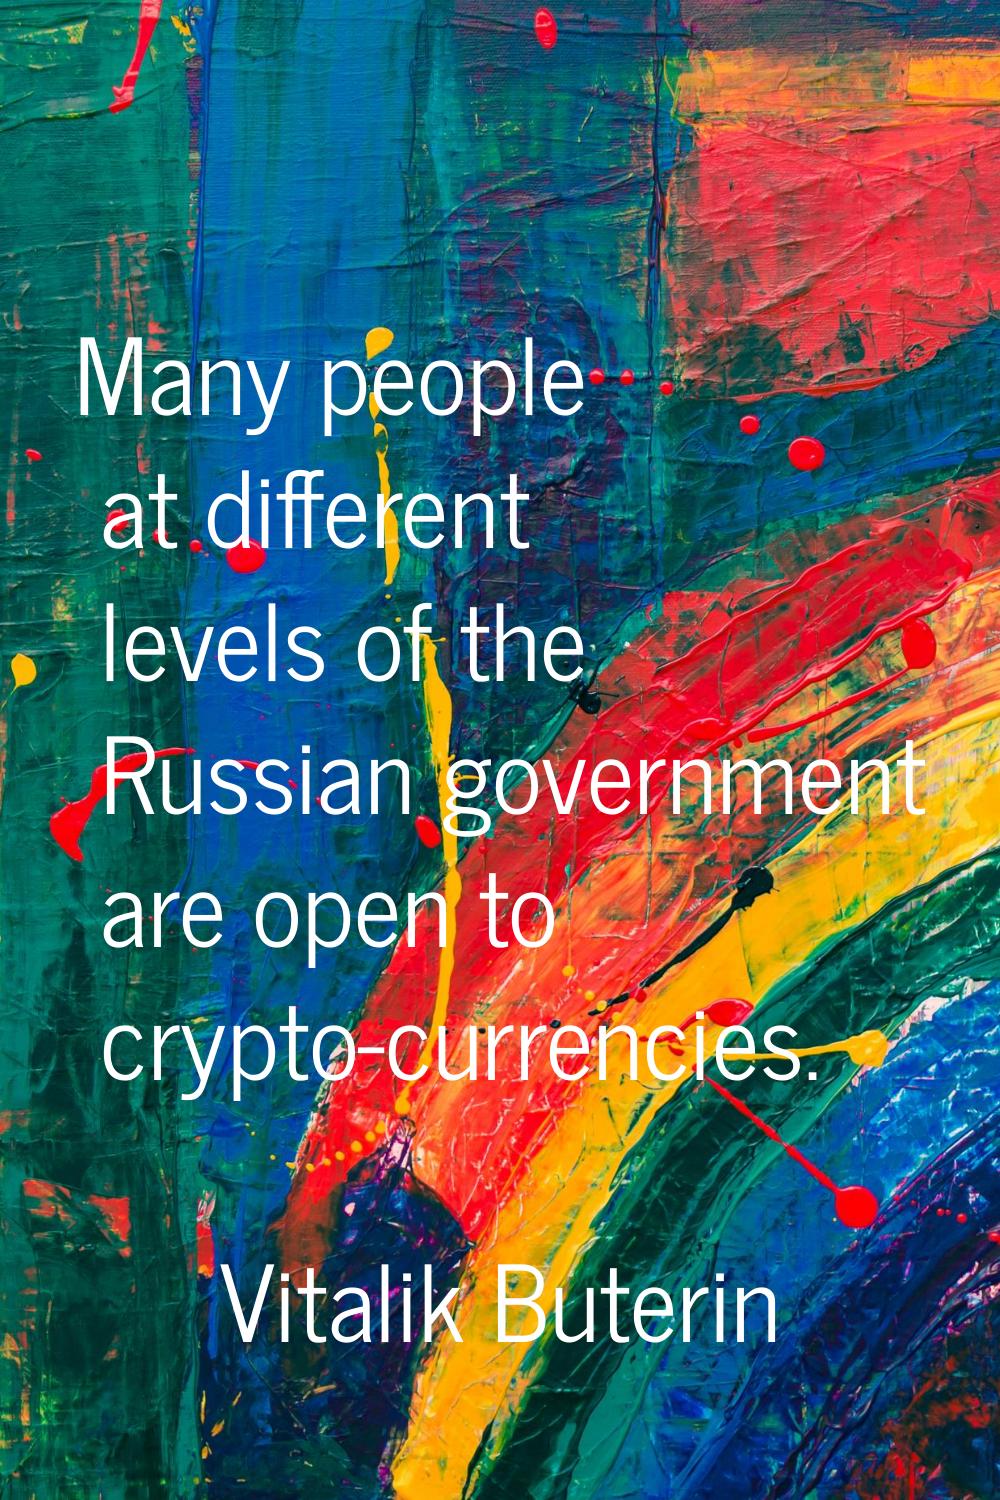 Many people at different levels of the Russian government are open to crypto-currencies.